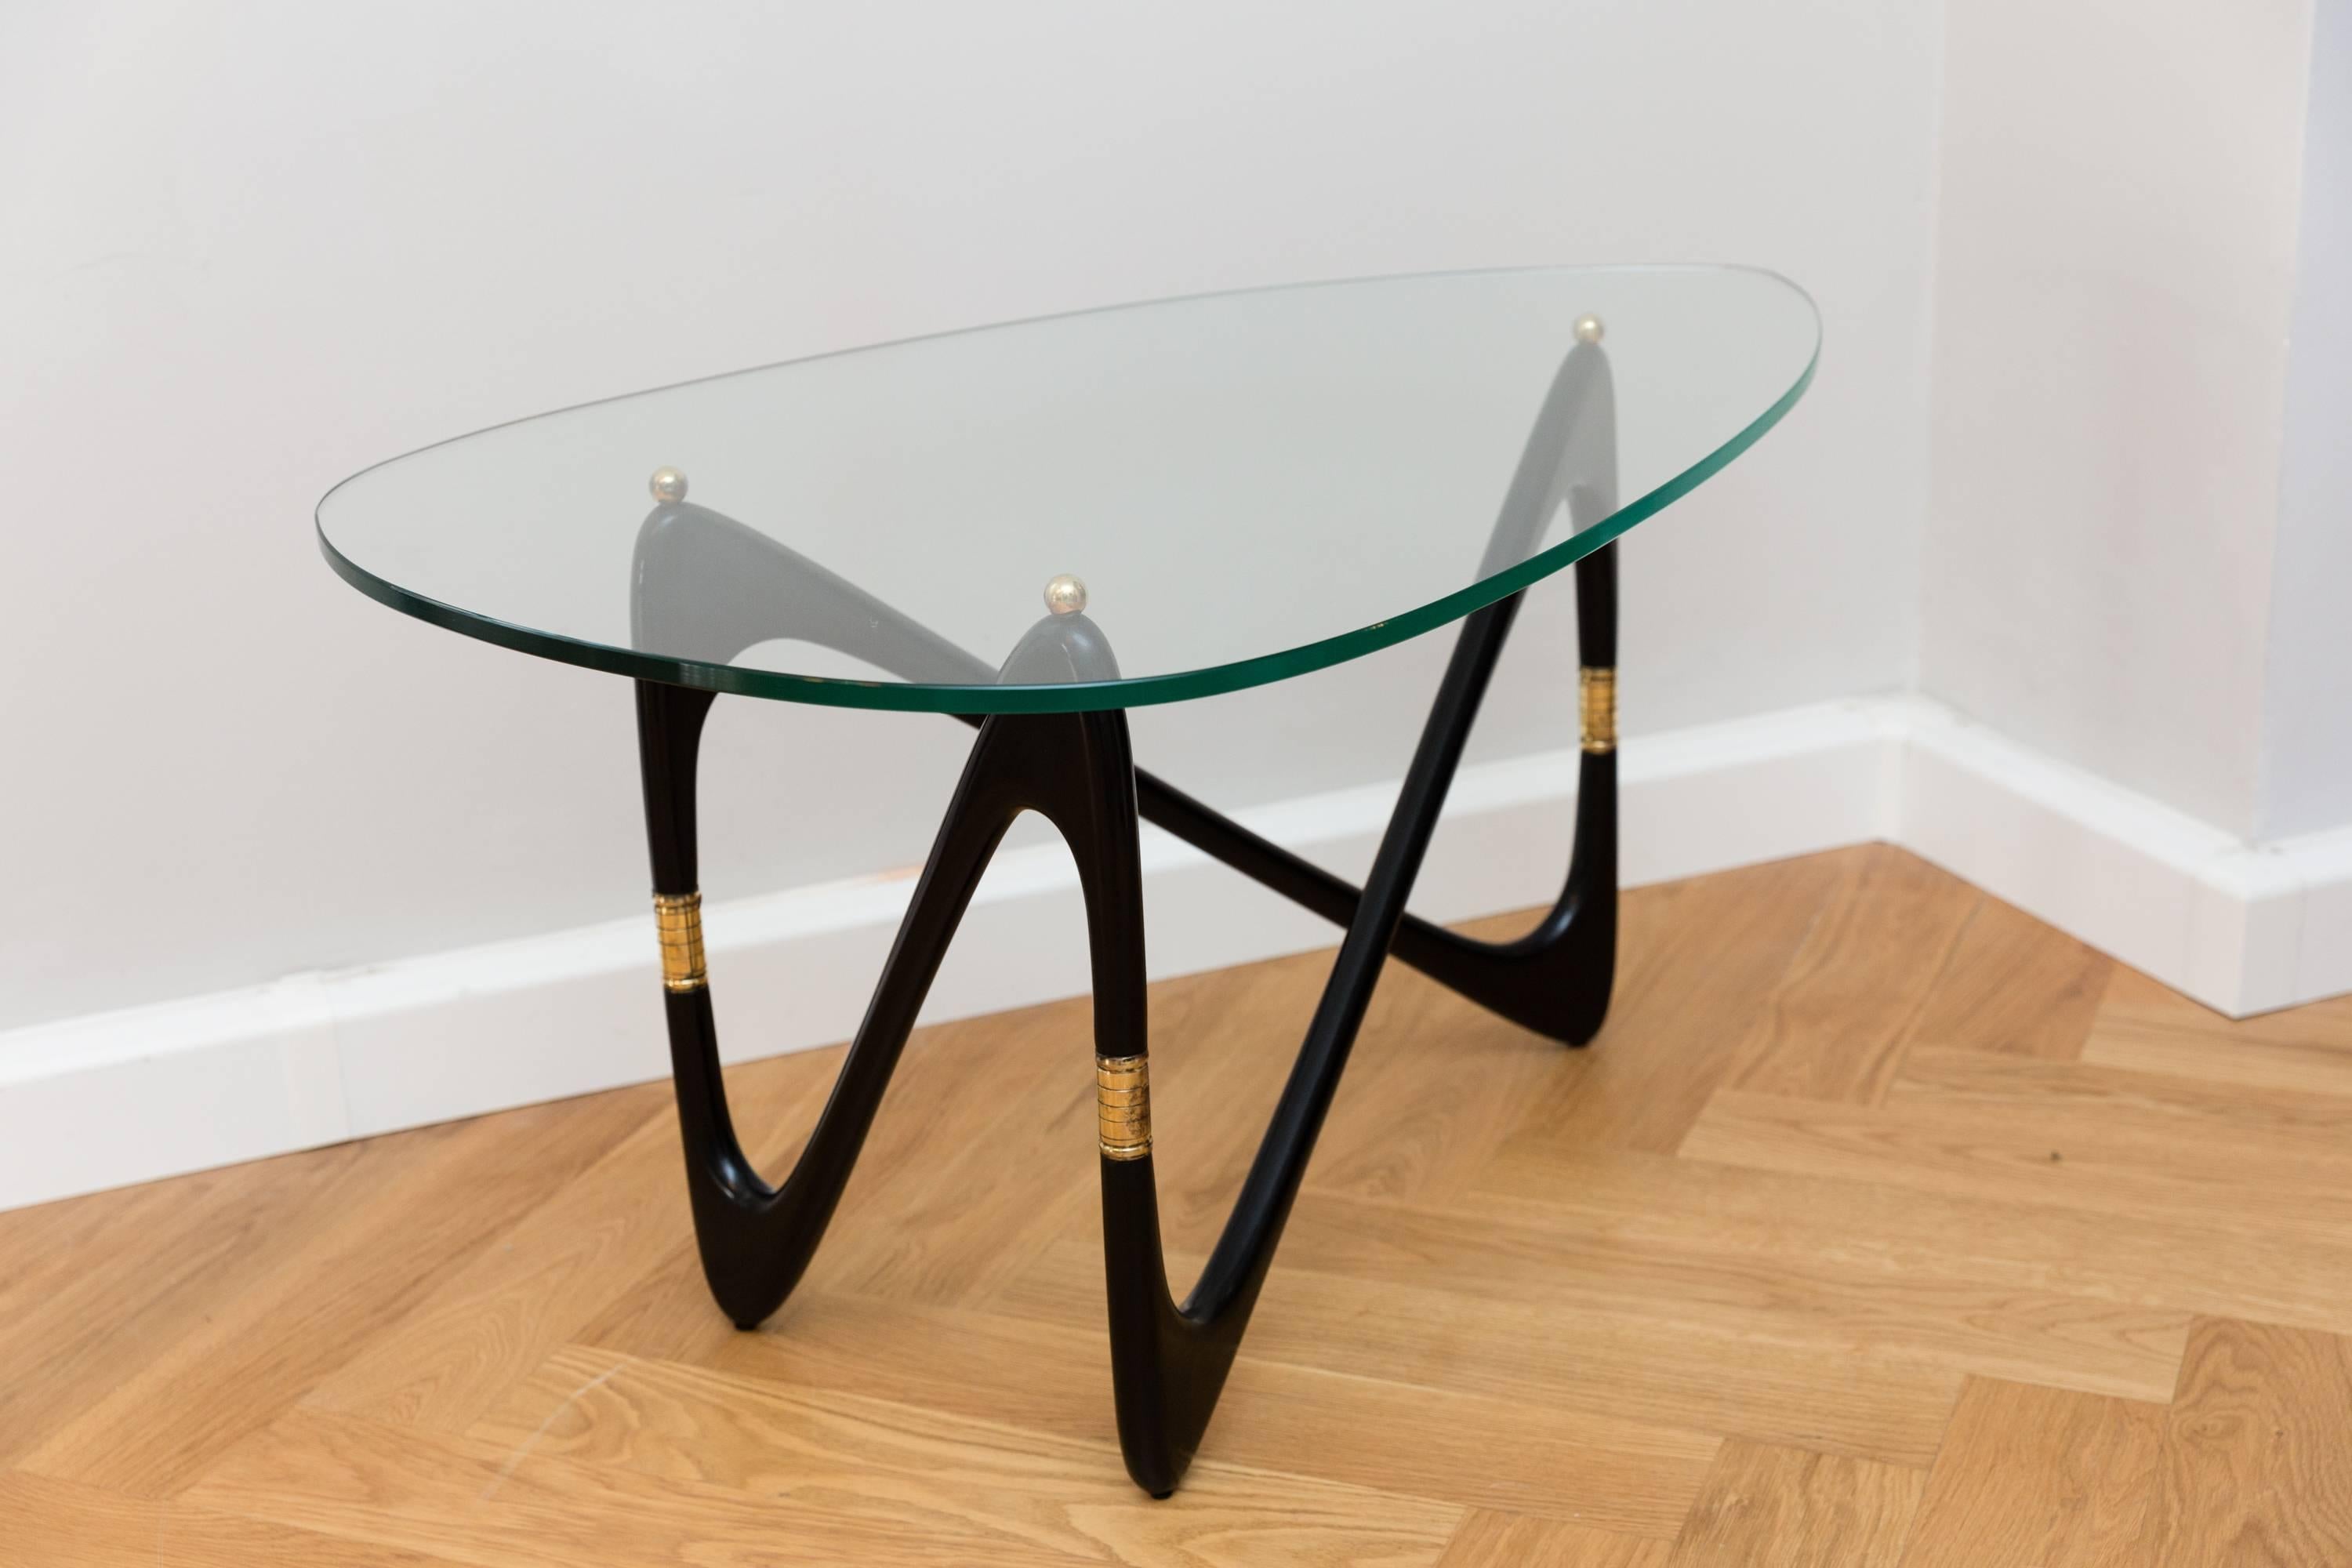 Rare Cesare Lacca coffee table, Italy circa 1950, elegant shaped shellack lacquered wood base, brass elements, polished brass balls, heavy 12mm glass top. Perfect condition, restored and new polished black shellack lacquer base.
No chips or